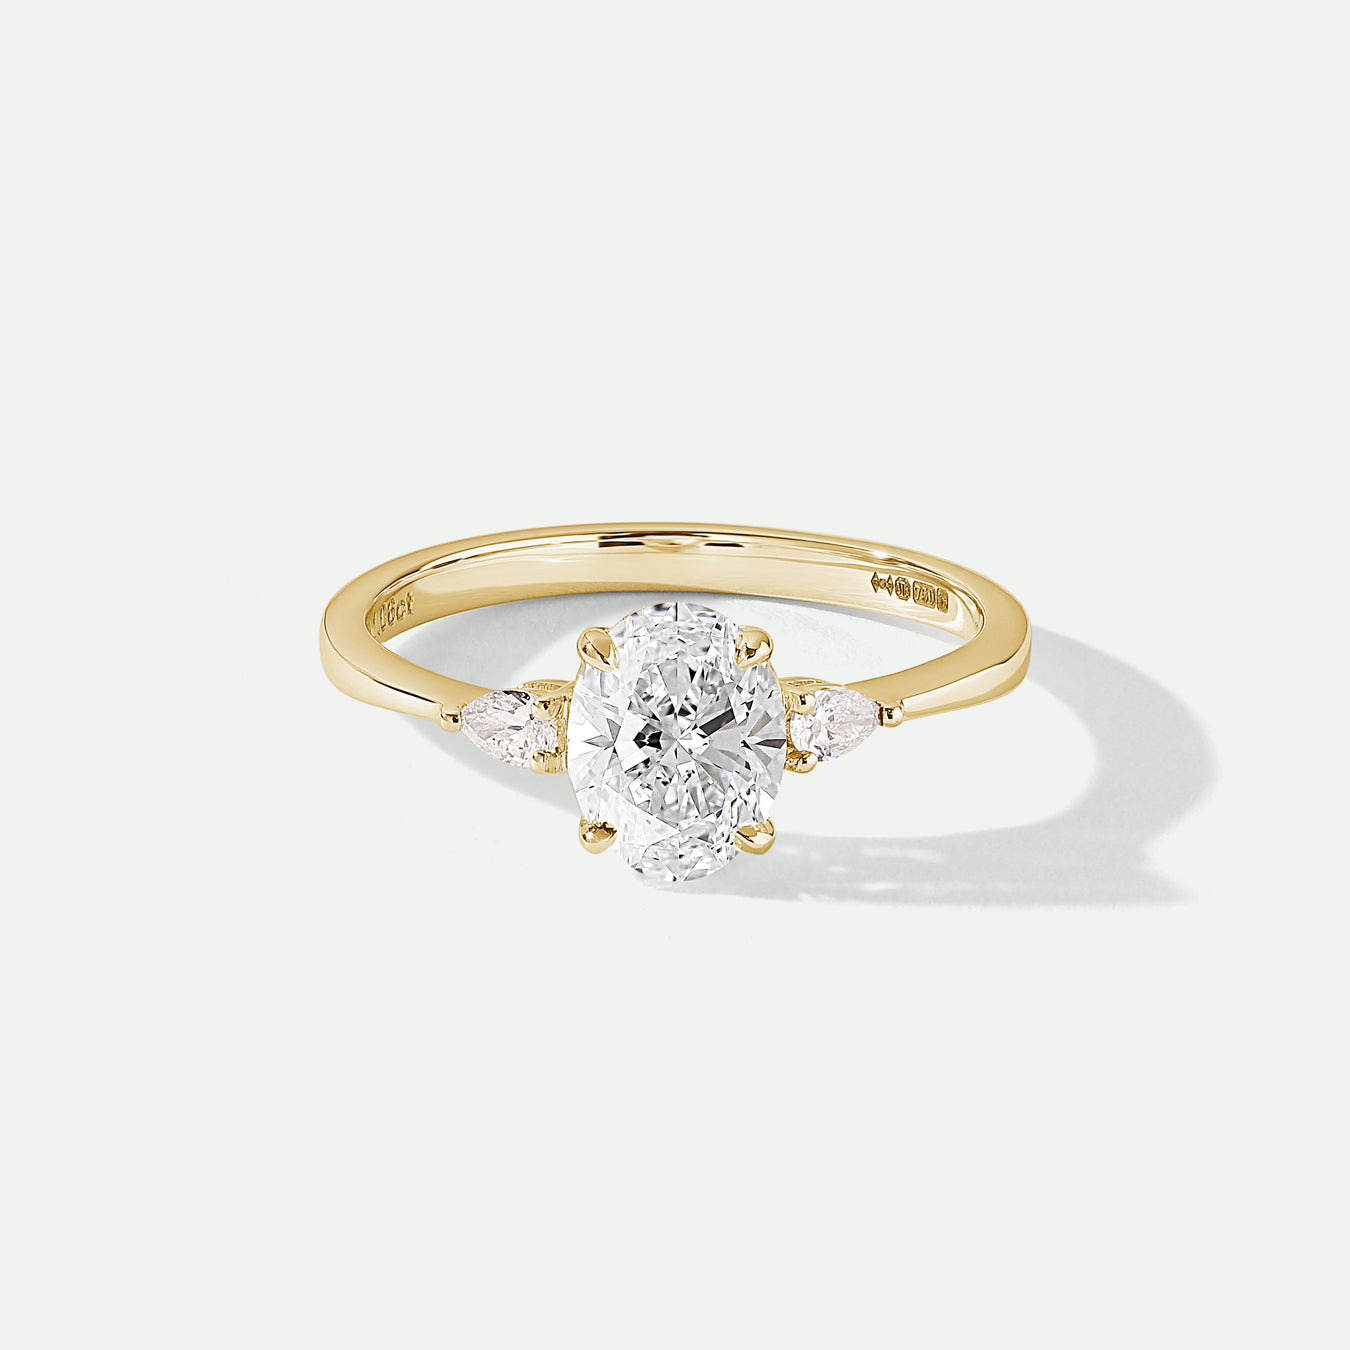 Oval cut lab grown diamond engagement ring with pear shaped sidestones